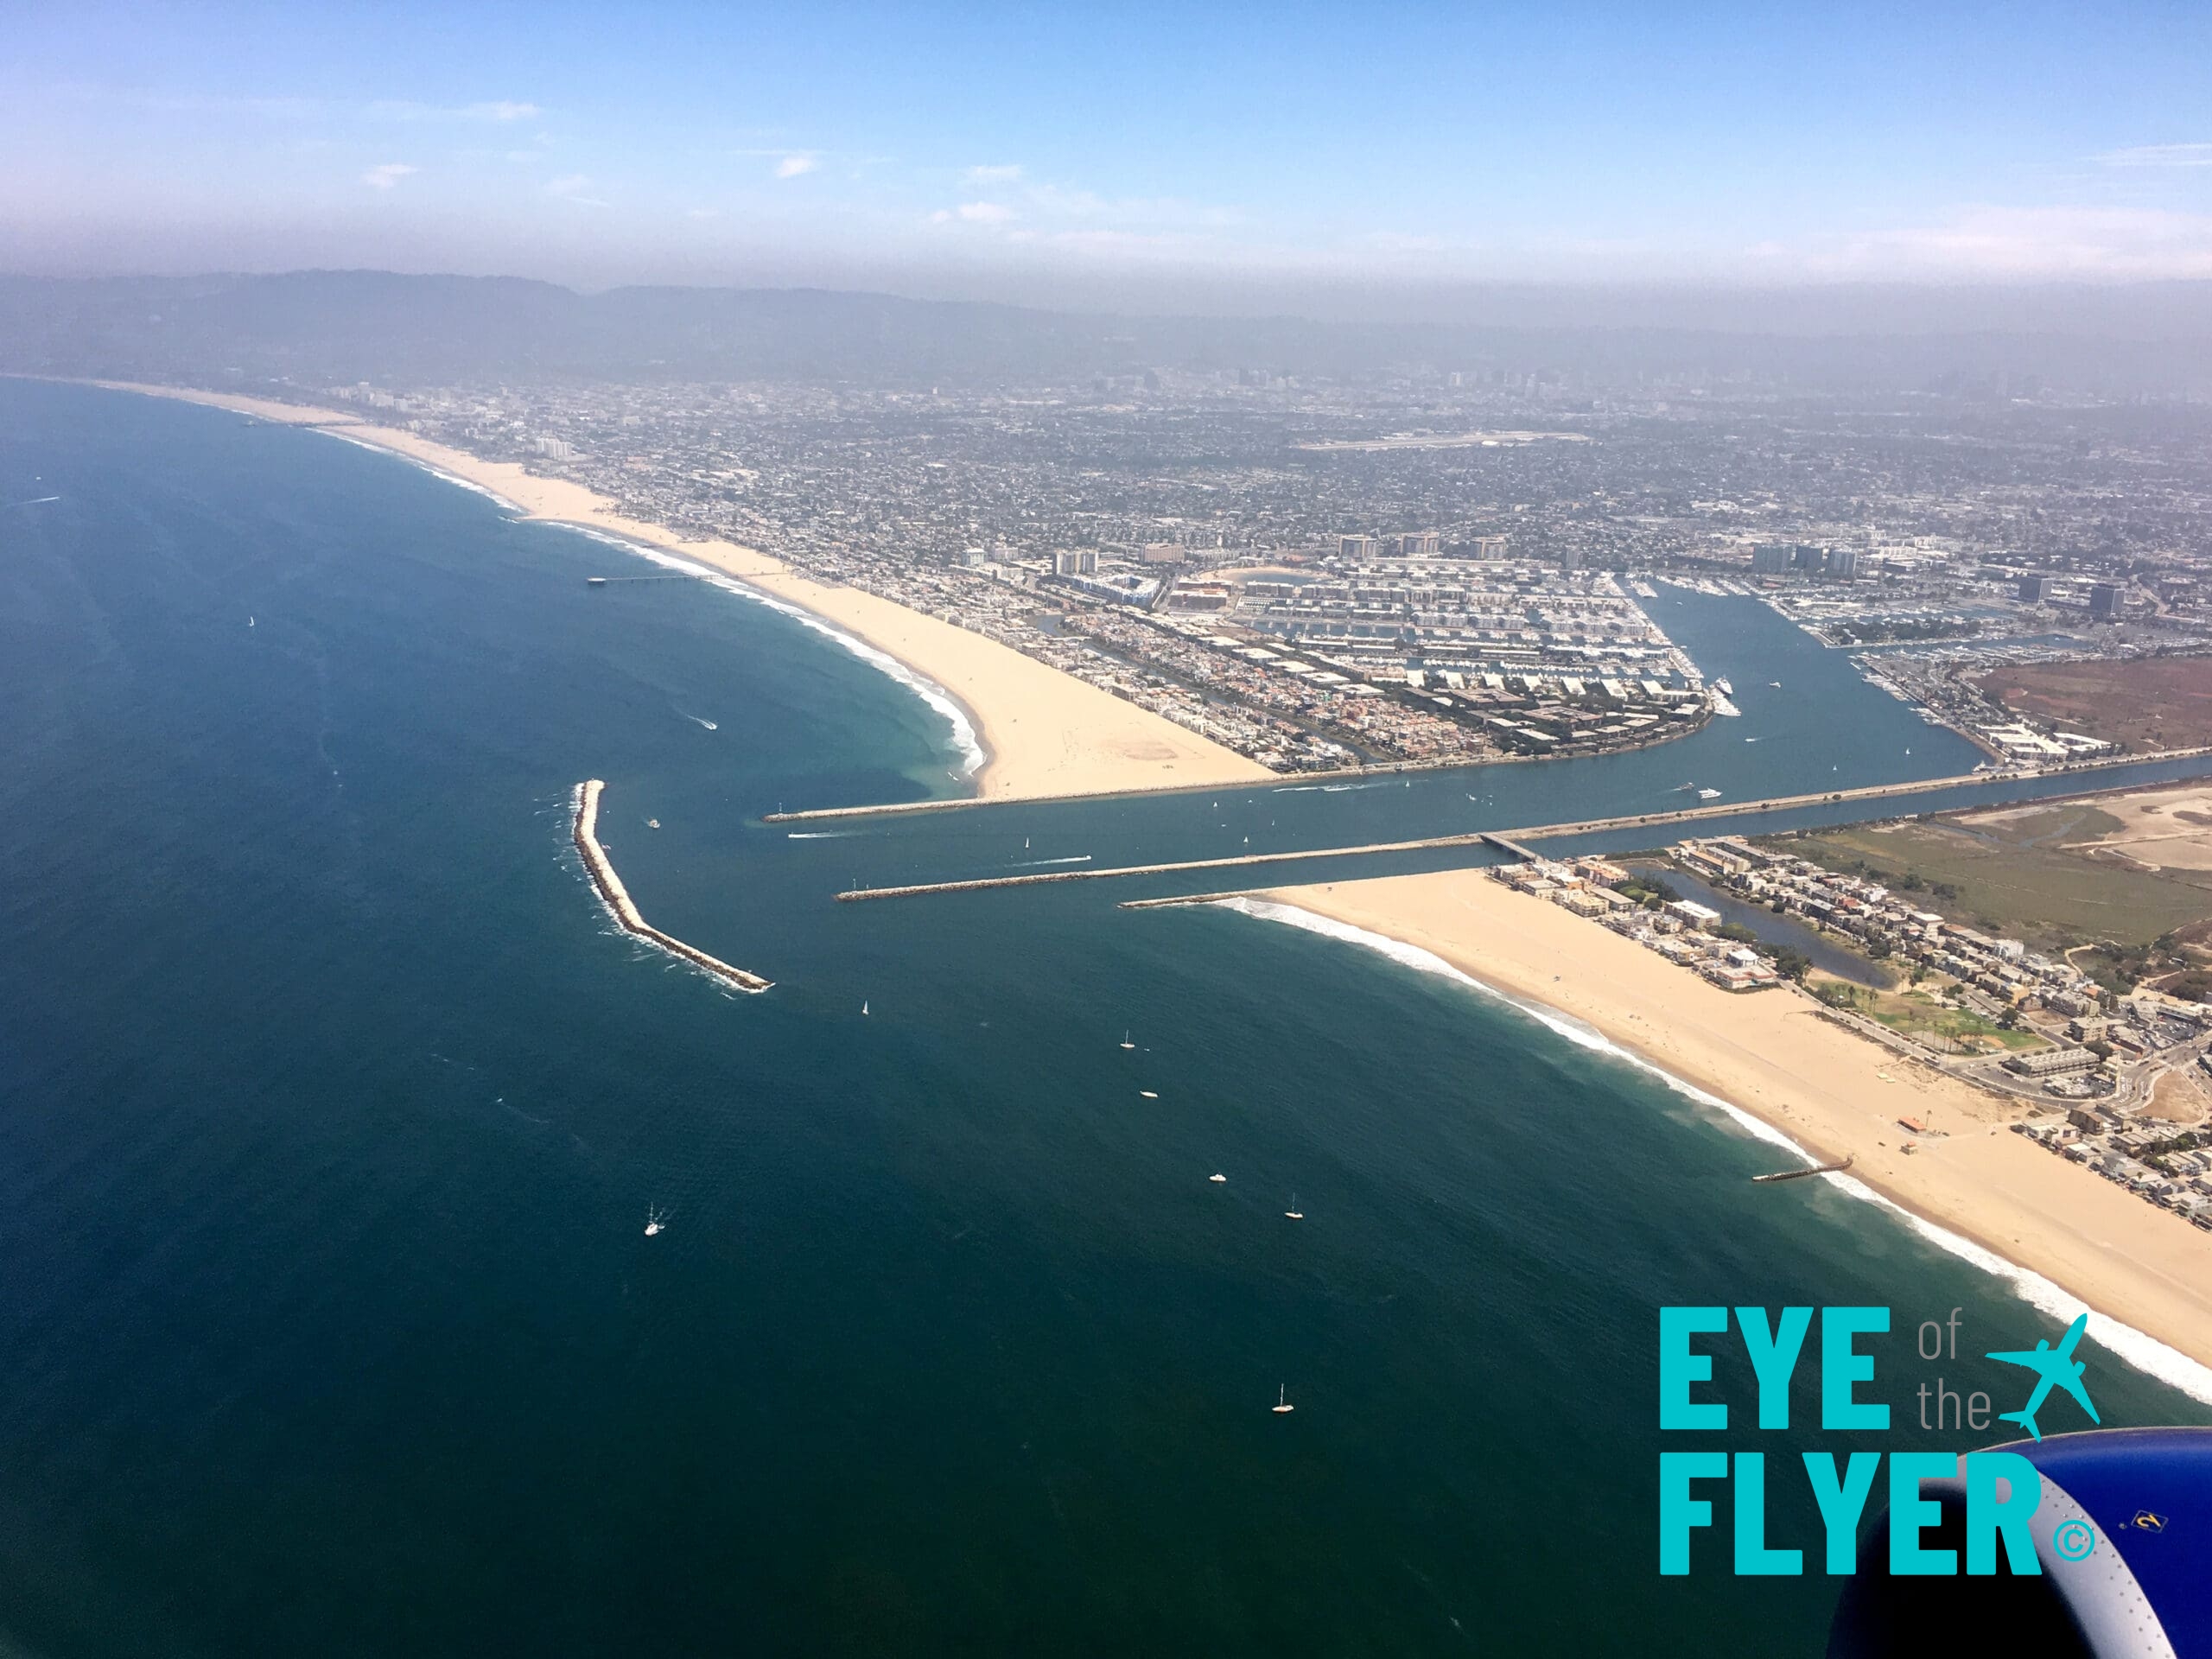 A view of Marina del Rey and Venice Beach while departing Los Angeles International Airport (LAX). Doesn't it look like the breakwater and jetties form a smile?